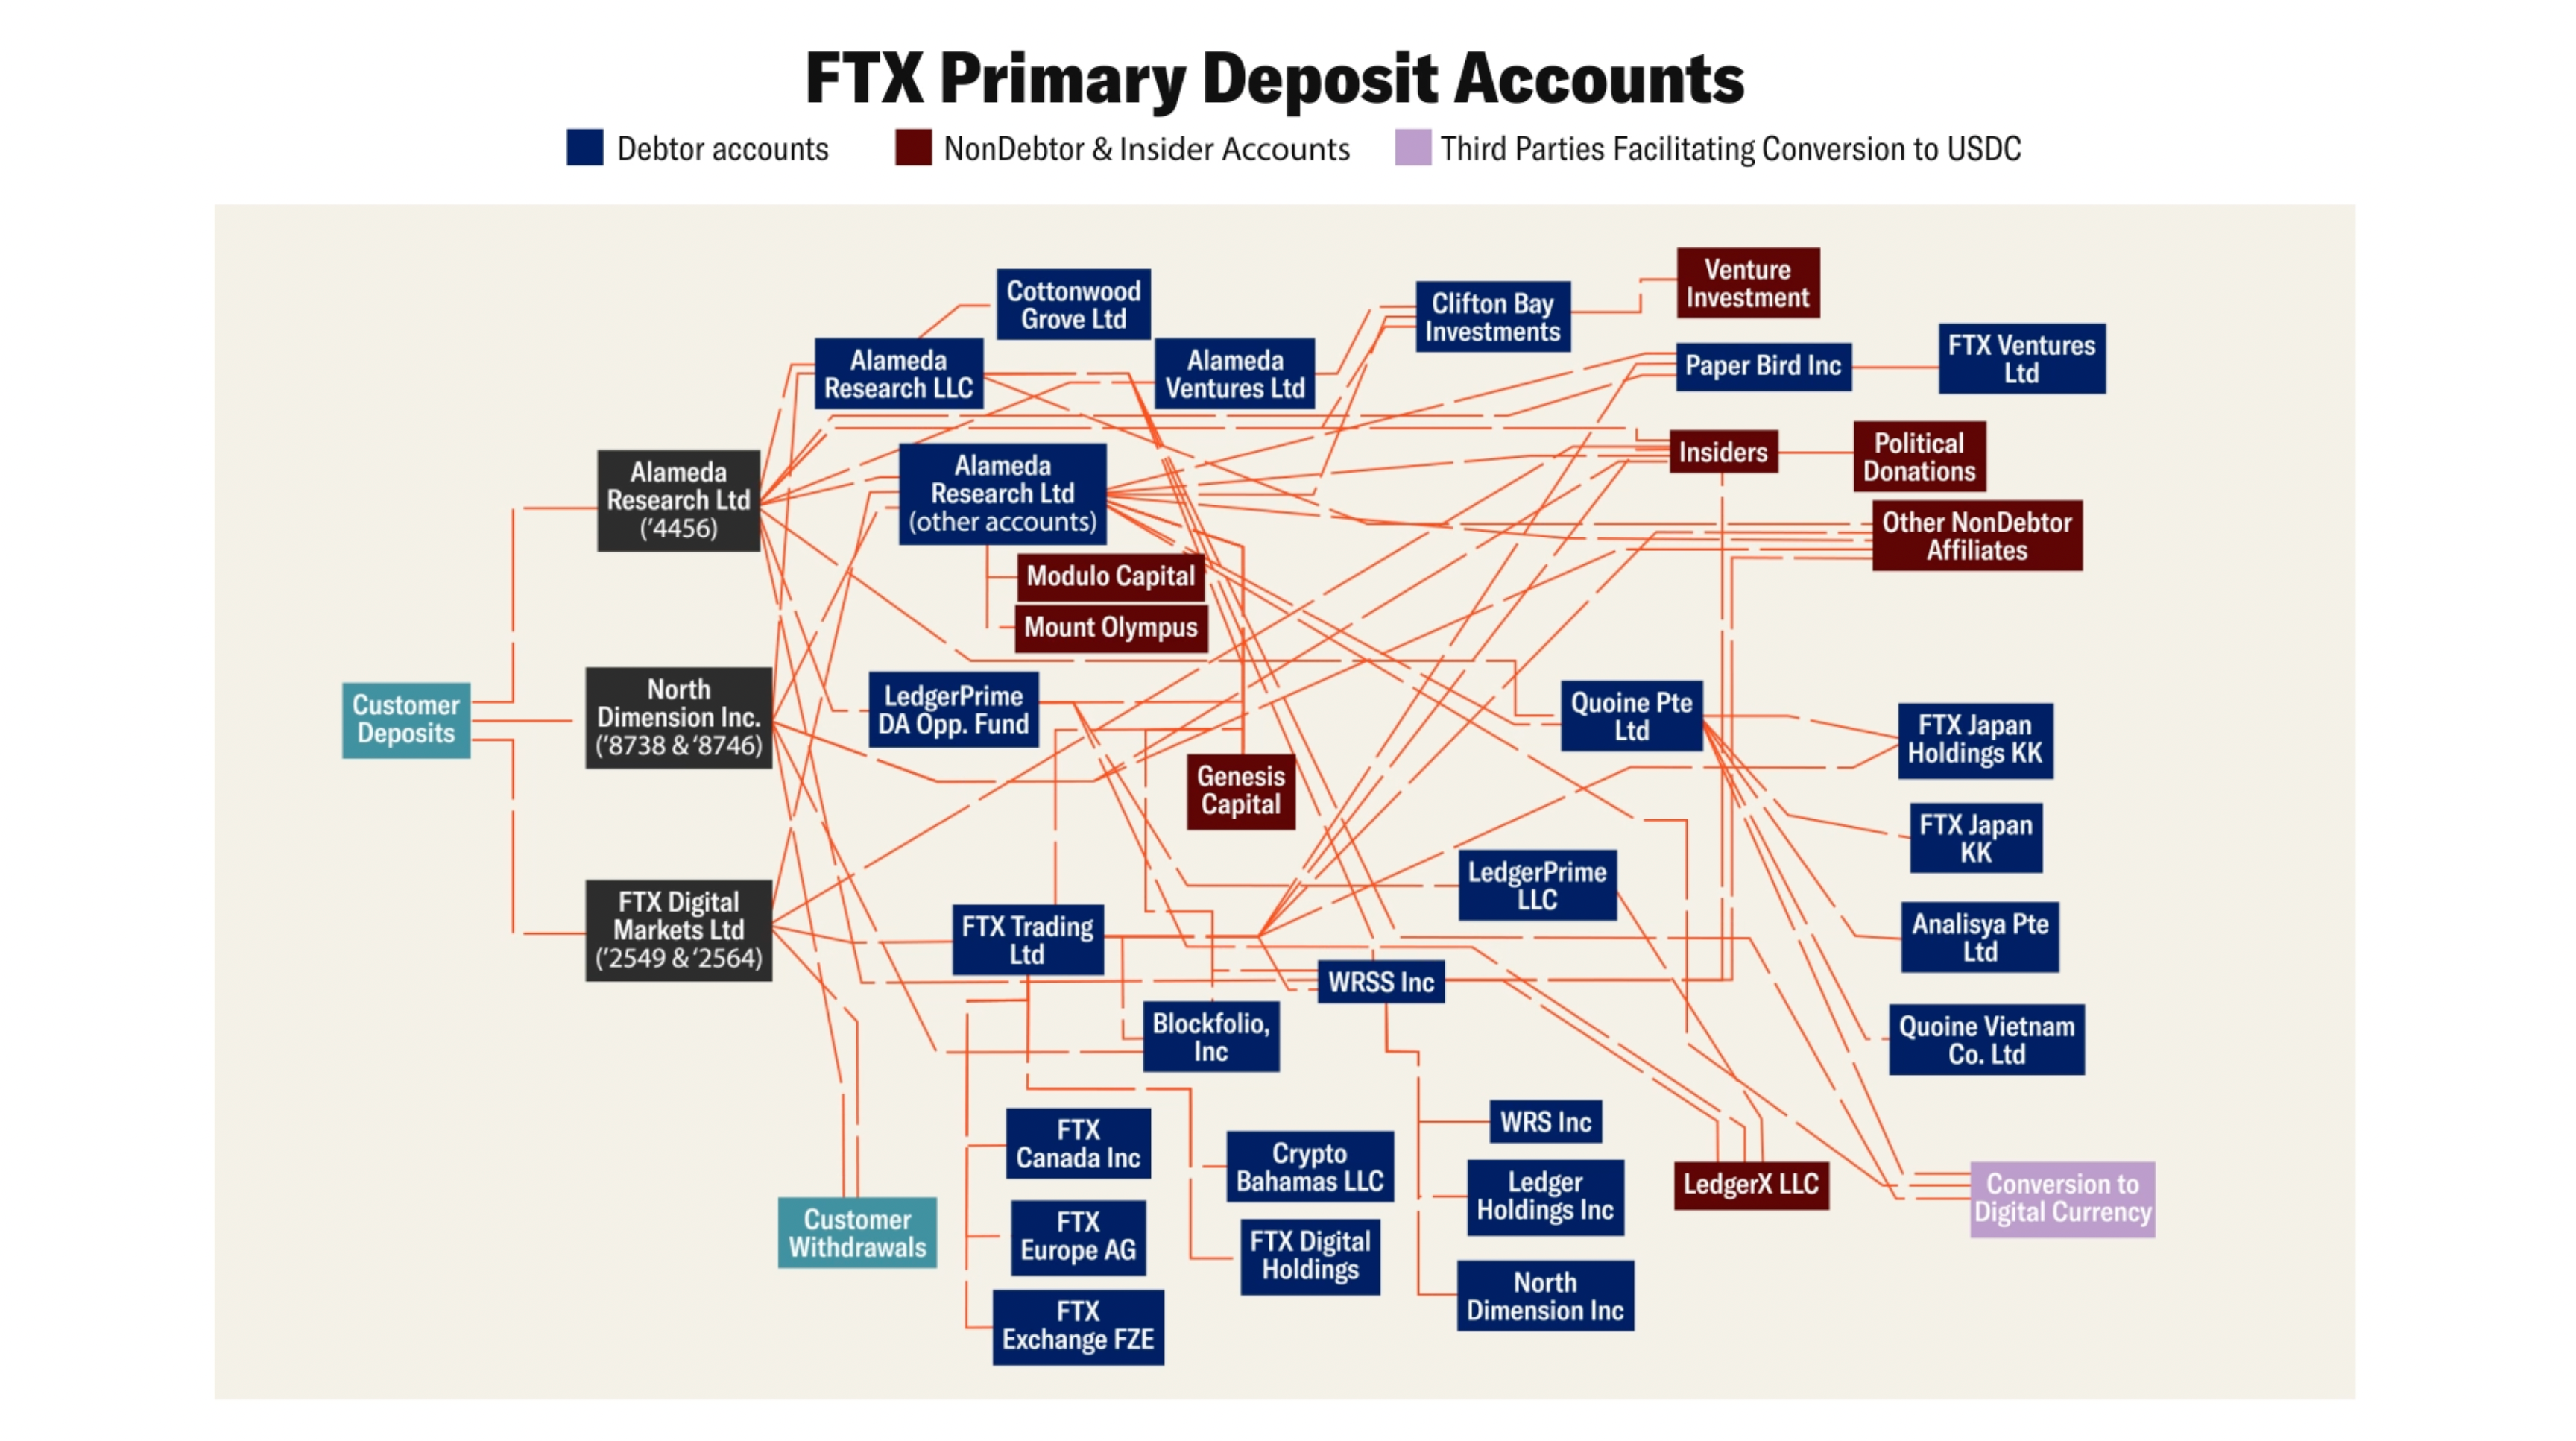 John Ray's second FTX report reveals a dizzying relationship between bank accounts and deposits between FTX and Alameda Research.